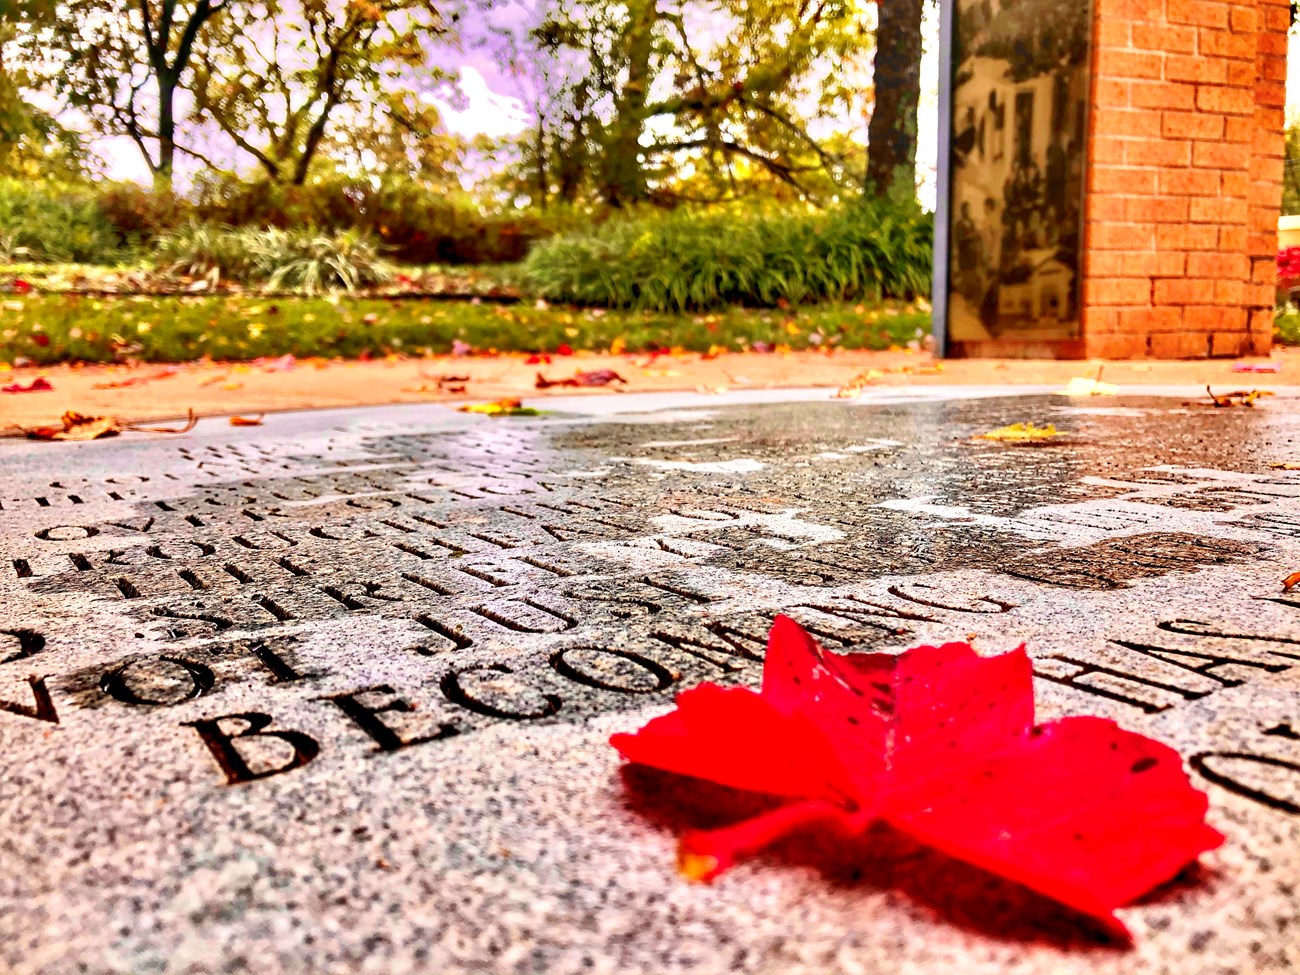 Fall leaves lie across the commemorative garden's inscribed poem.